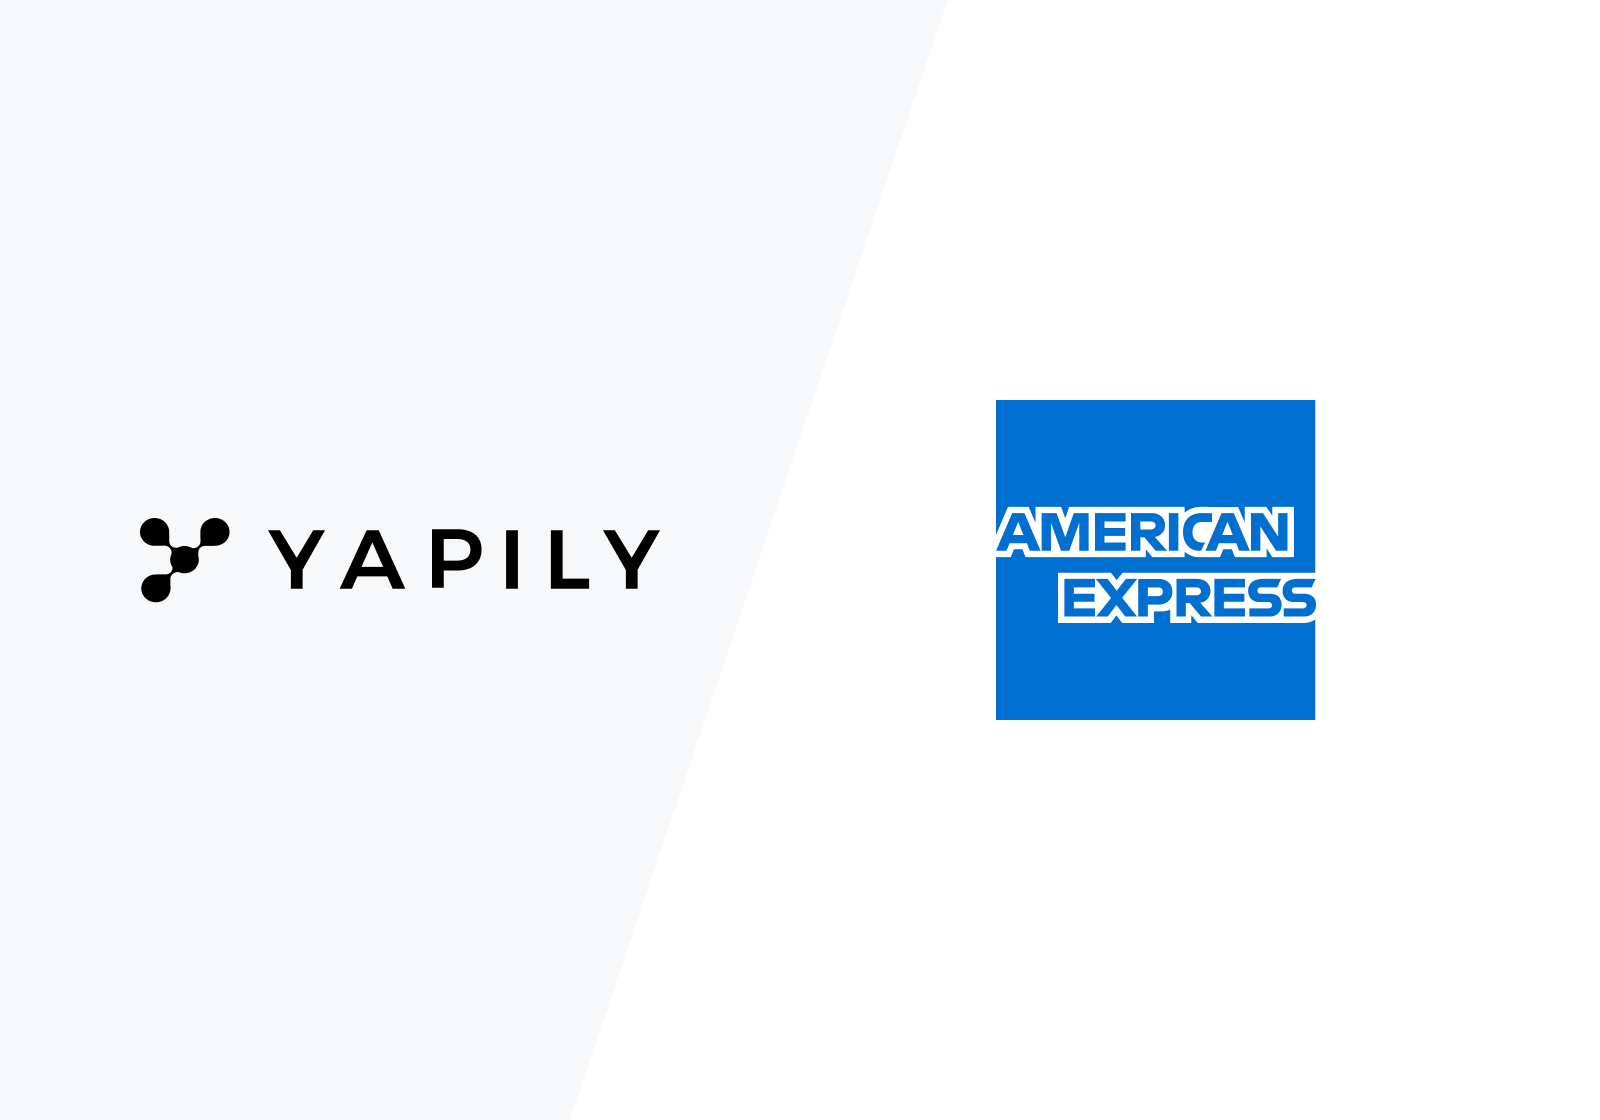 Yapily announces agreement with American Express to enable open banking payments across Europe